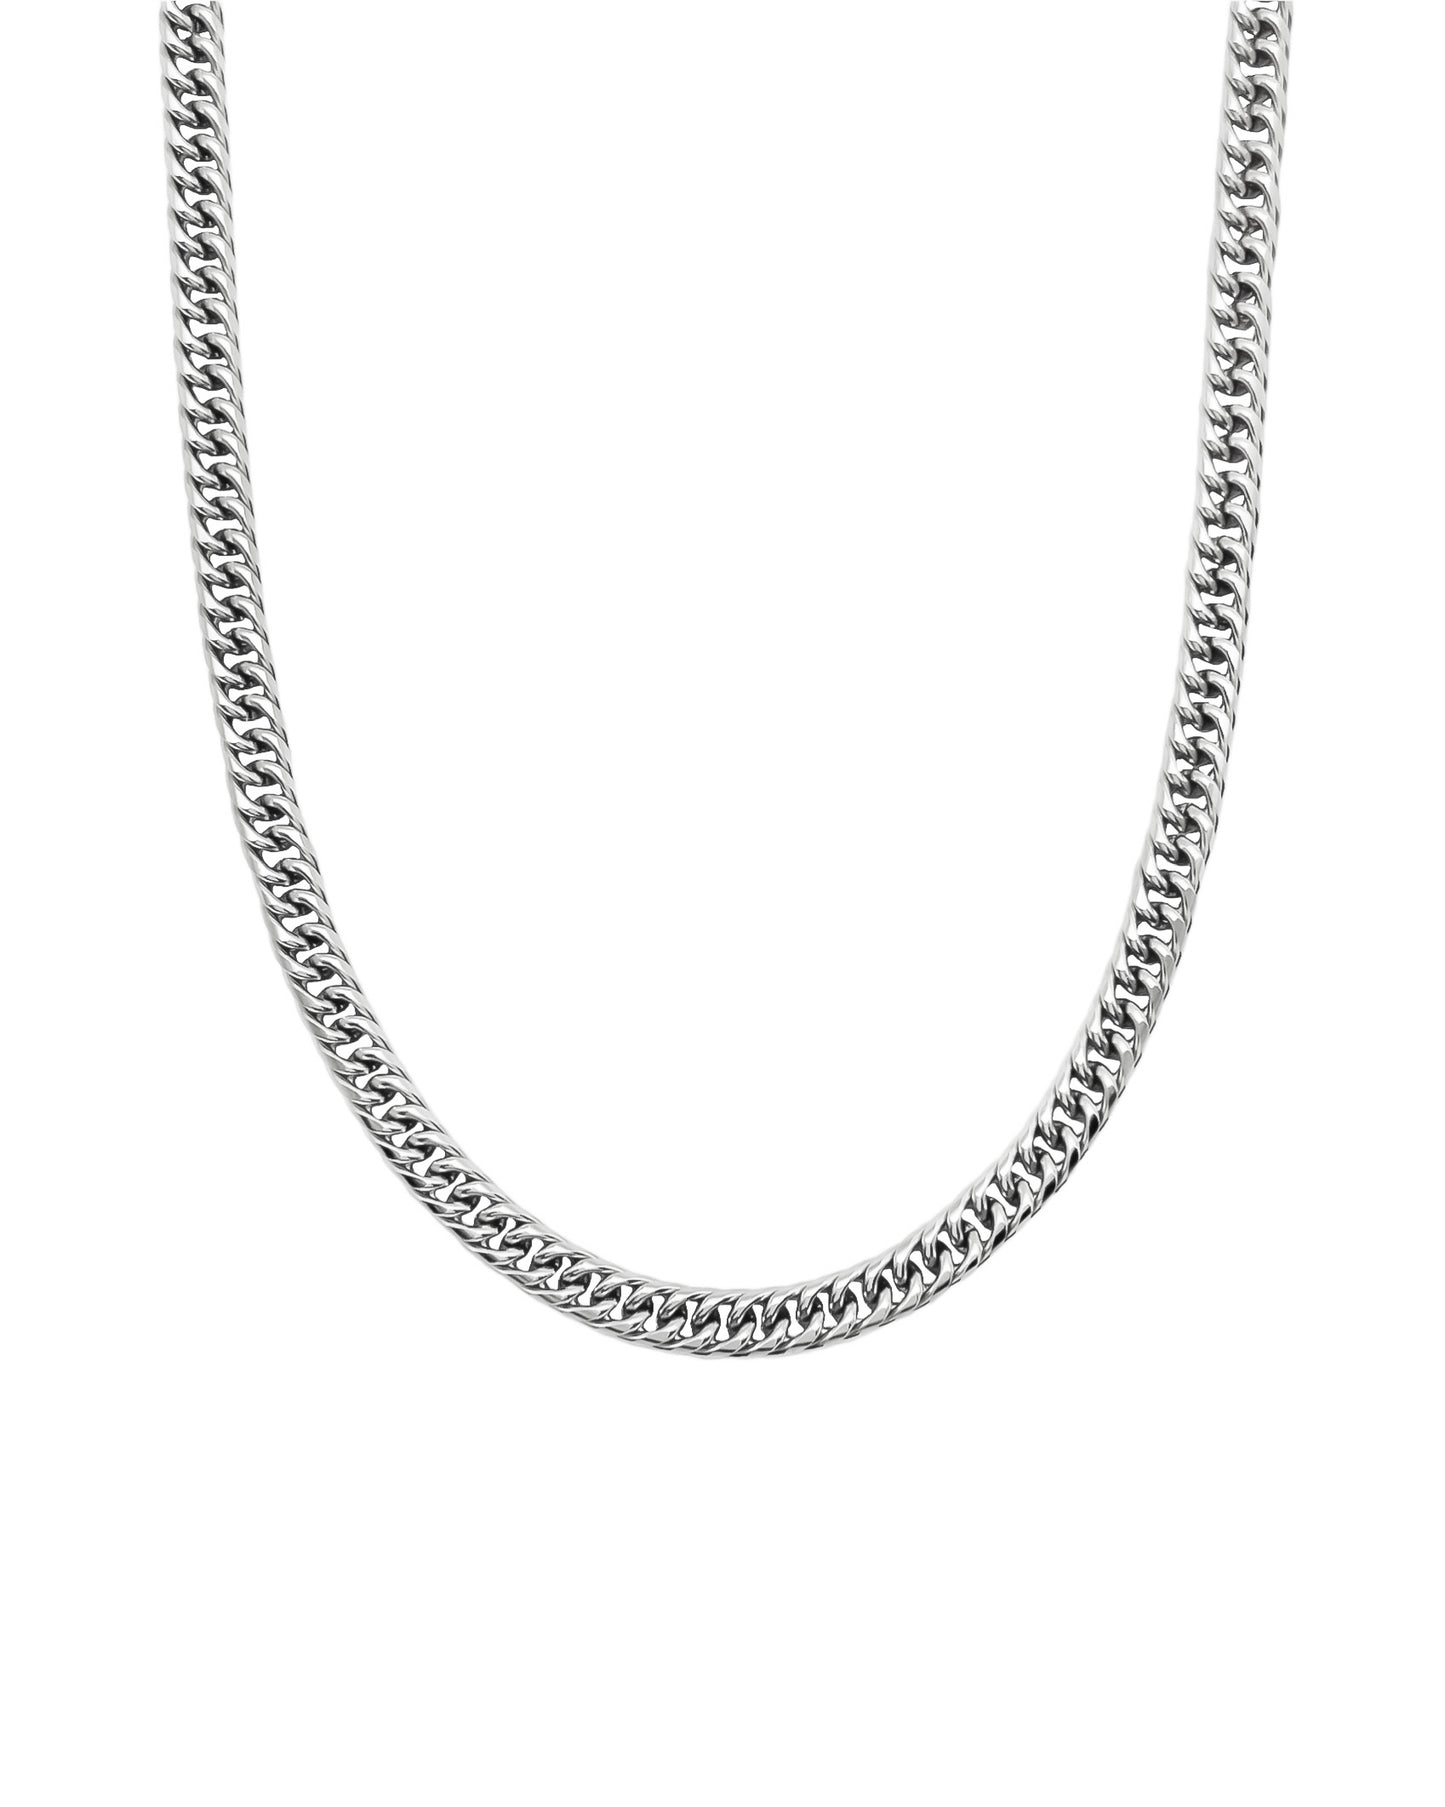 CROSSED-CHAIN Necklace